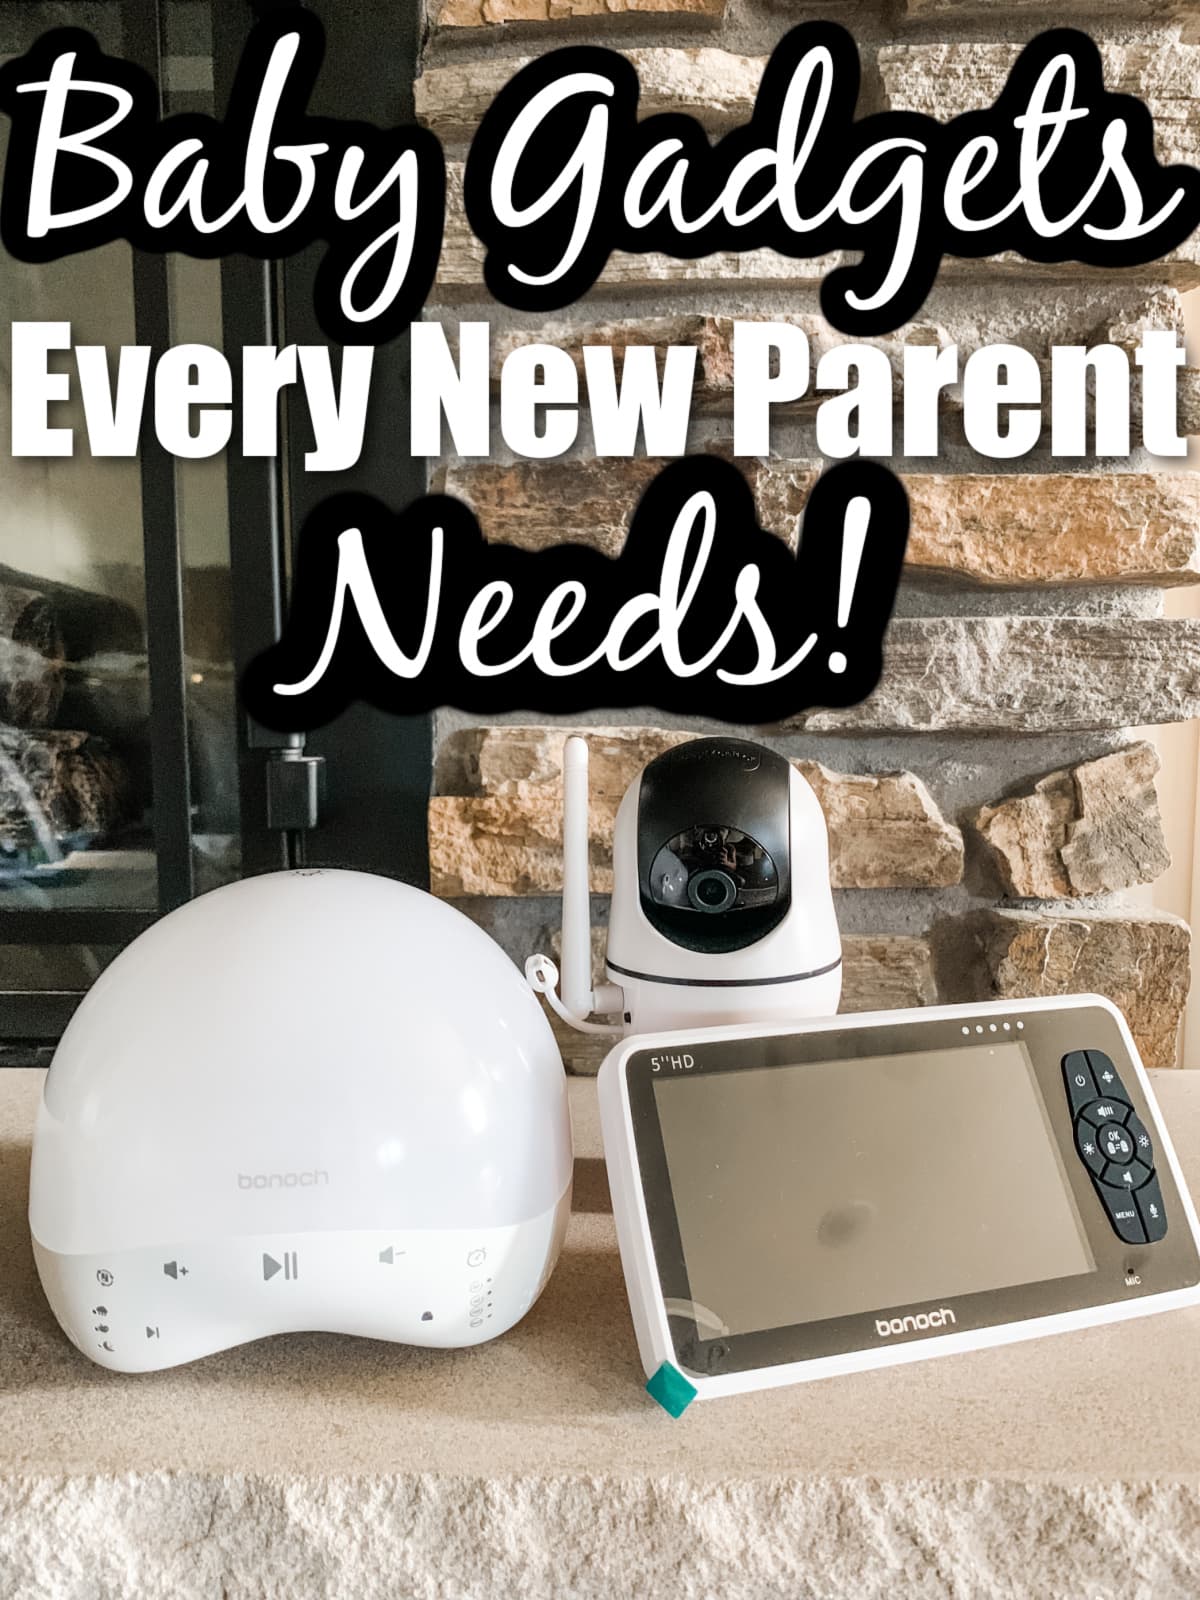 bonoch Baby Monitor Review & Bonoch Smart Nursery Light Review - Baby Gadgets Every New Parent Needs!